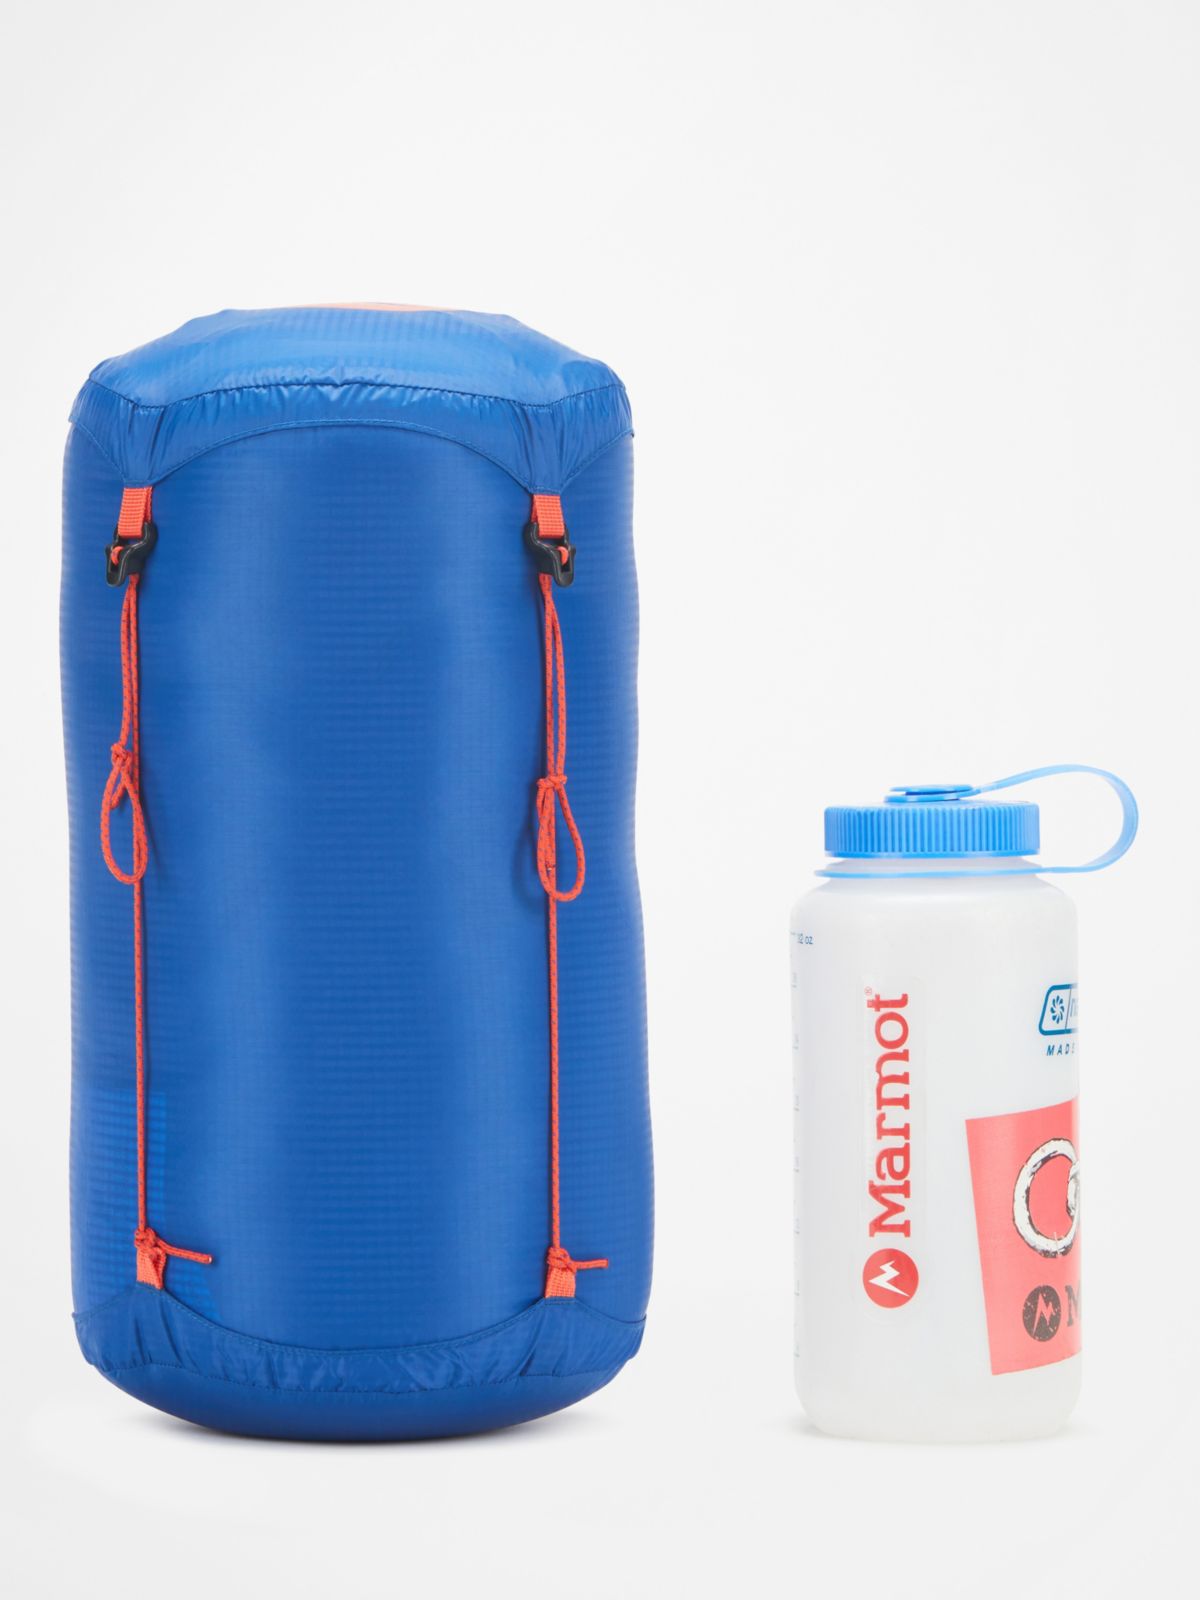 rolled up sleeping bag next to beverage container